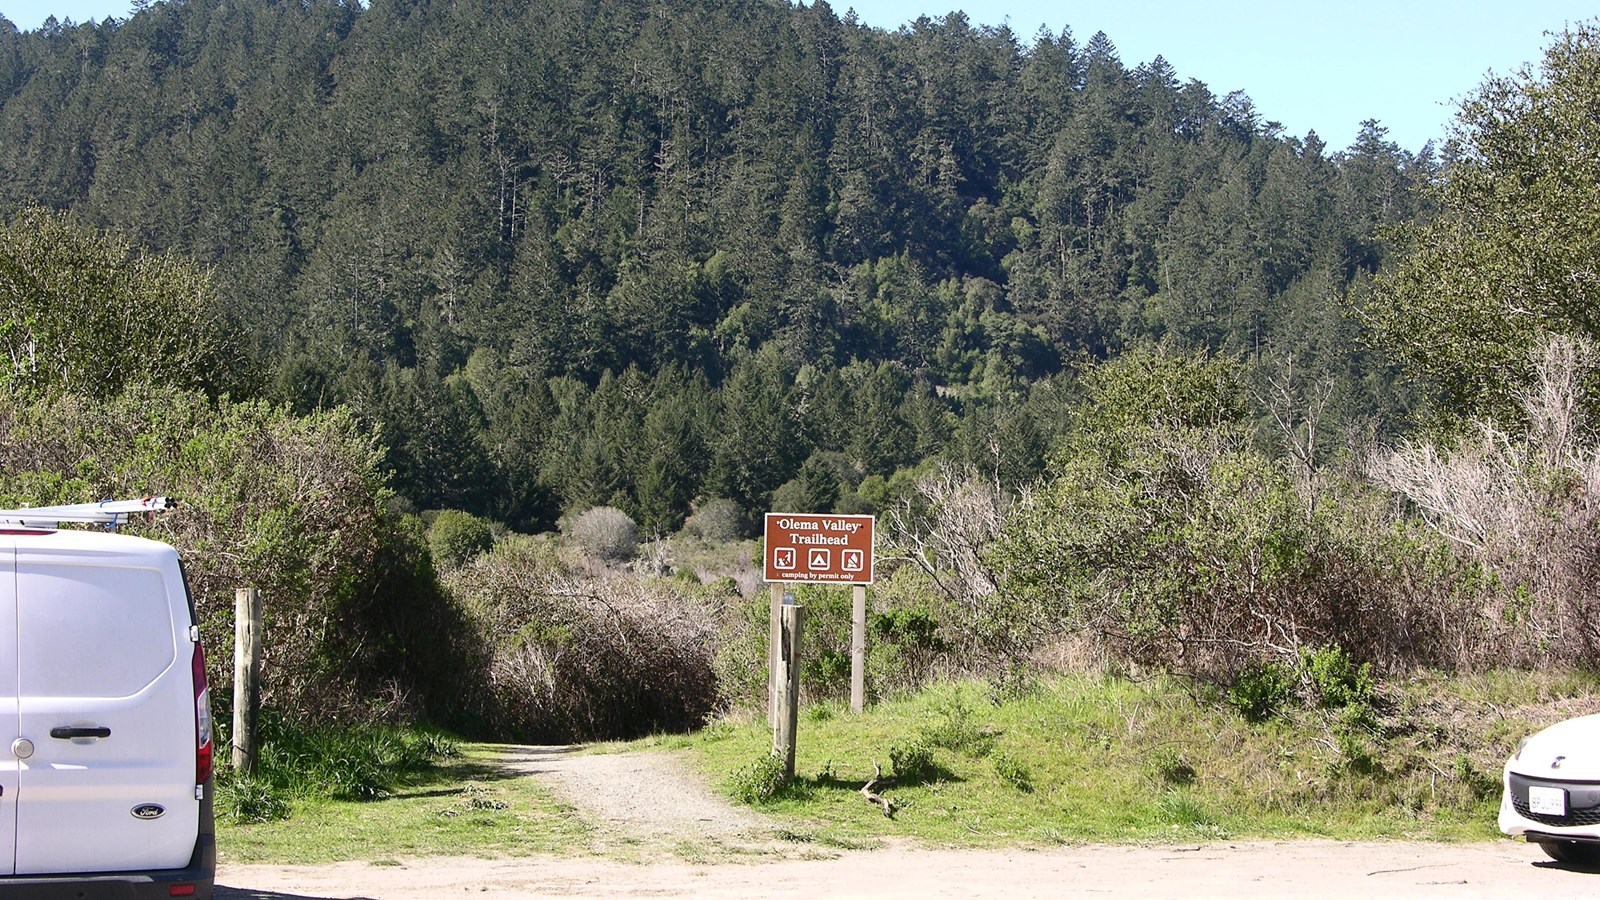 A moderately-sized brown trailhead sign stands adjacent to a dirt trail that leads away from a road.